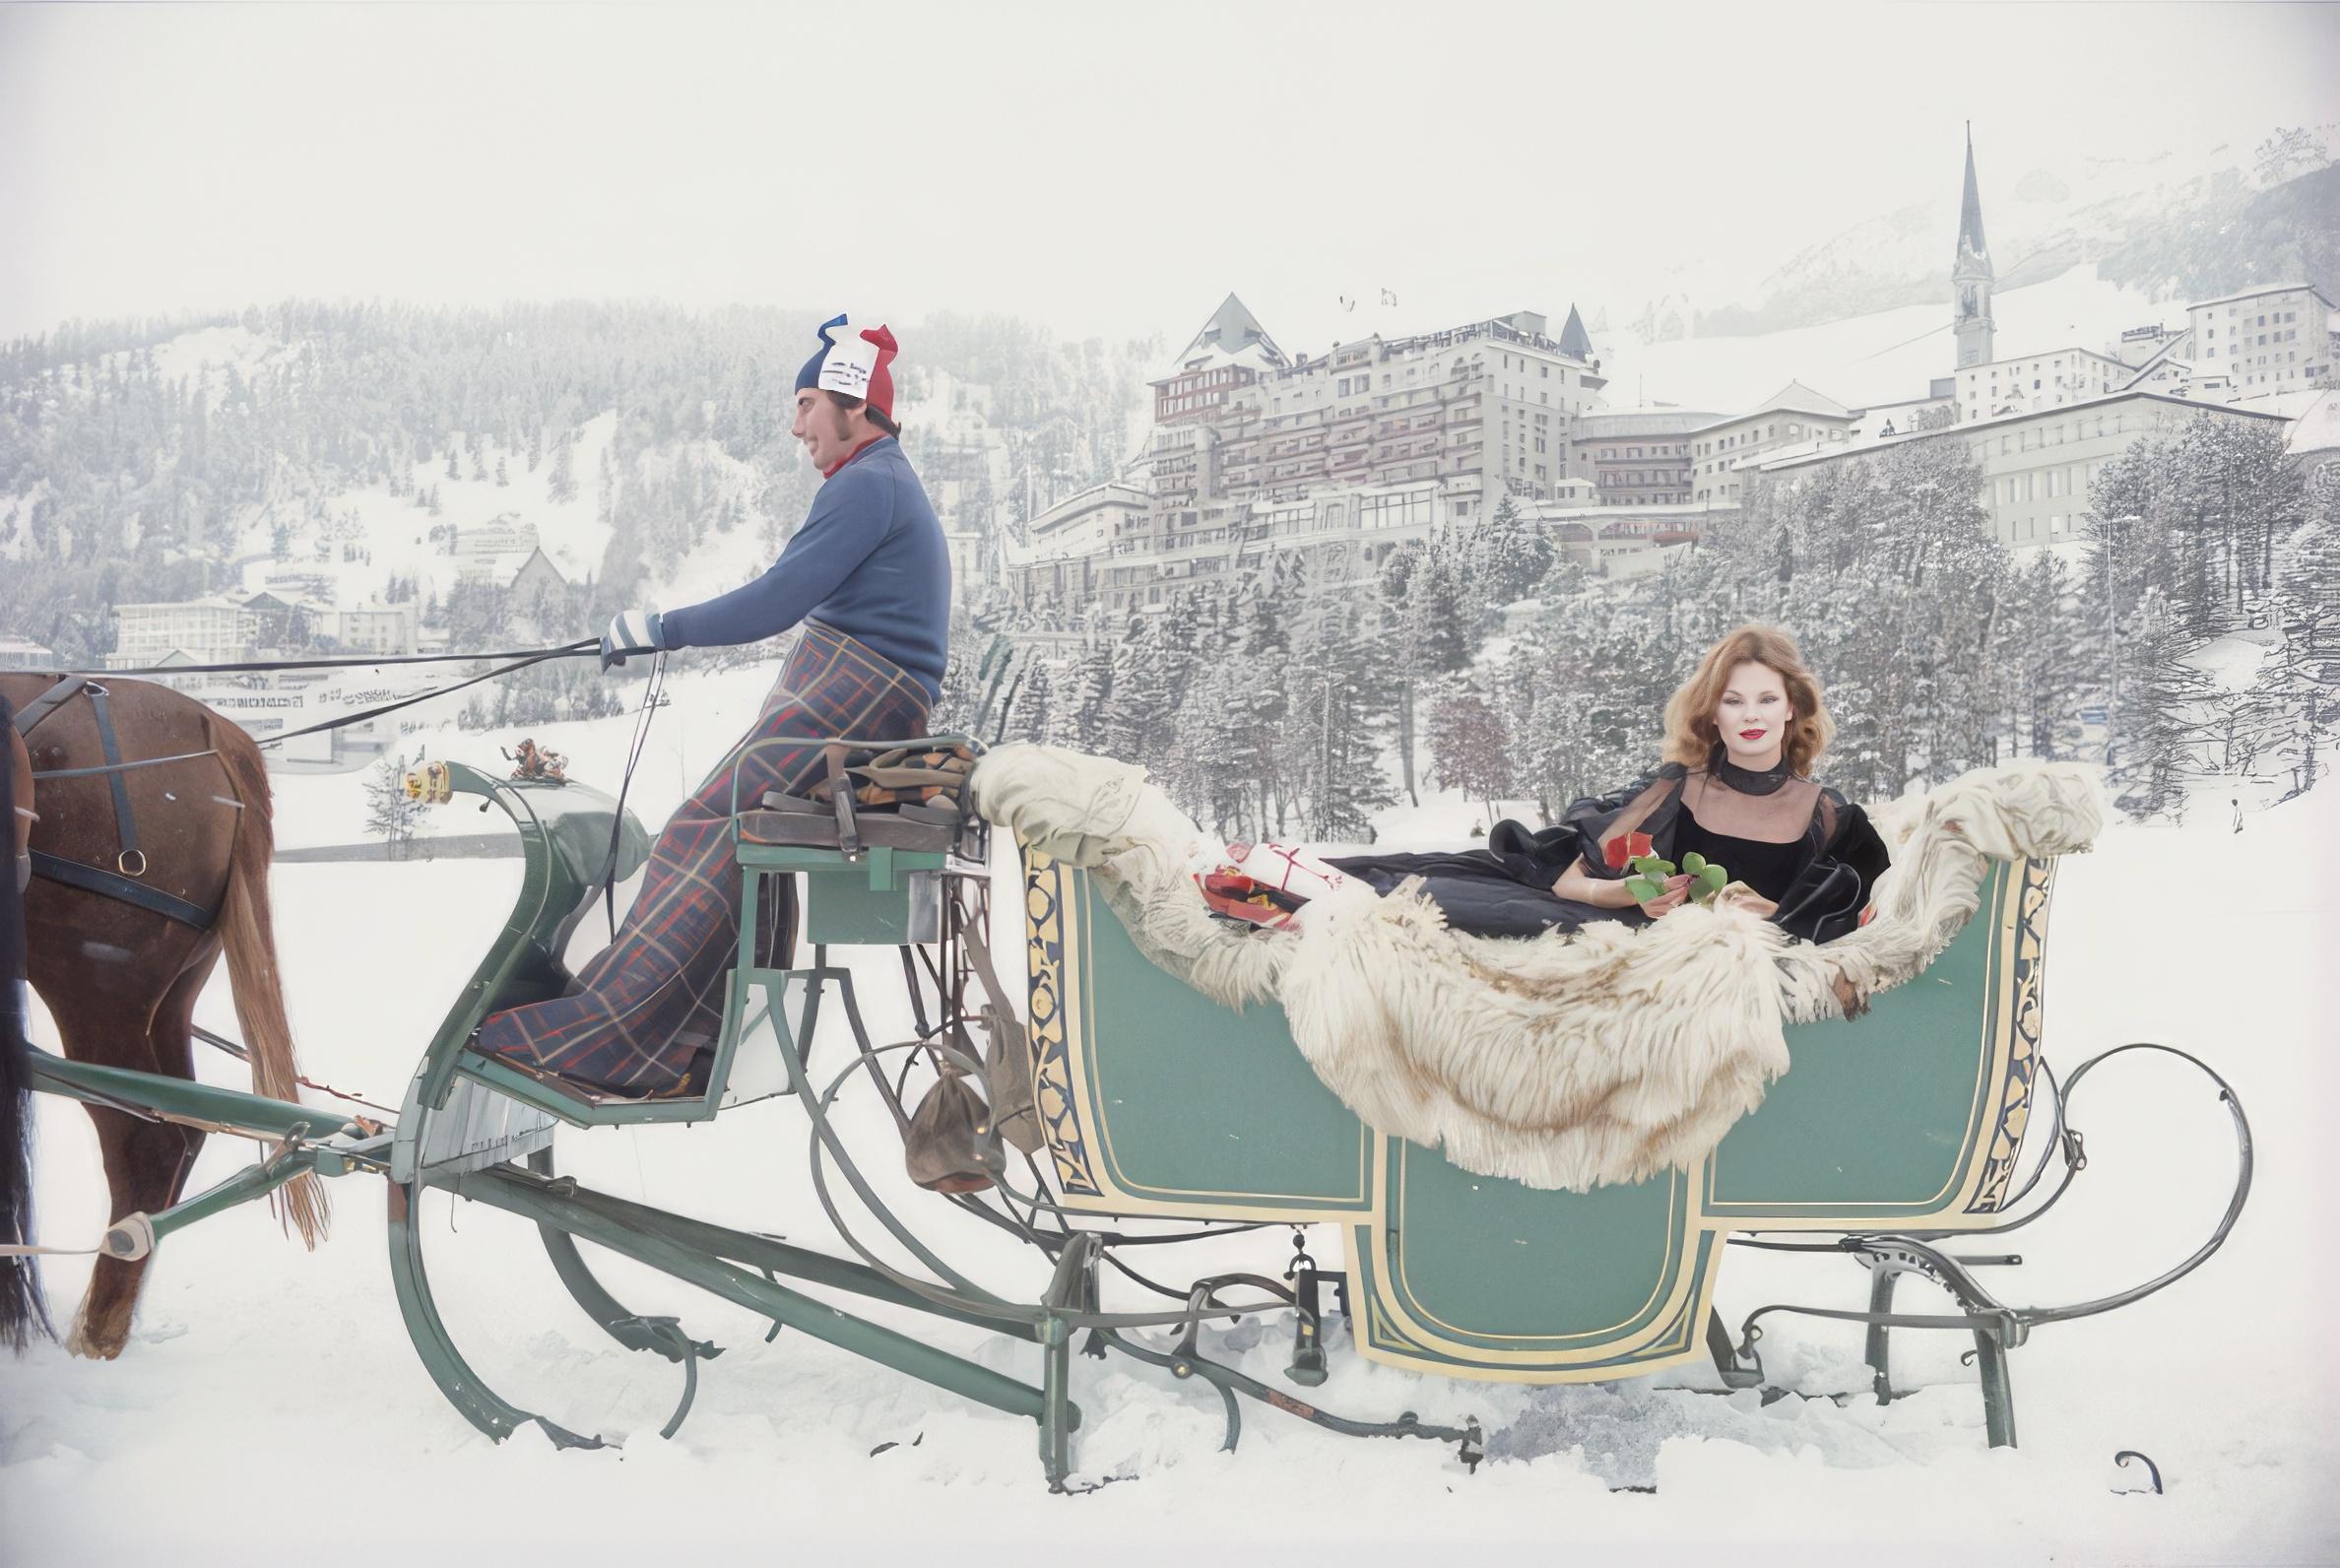 Slim Aarons
Karen Davis
1978 (printed later)
C print
Estate stamped and hand numbered edition of 150 with certificate of authenticity from the estate.   

American opera singer Karen Davis arrives at the Palace Hotel in an antique sleigh, St.